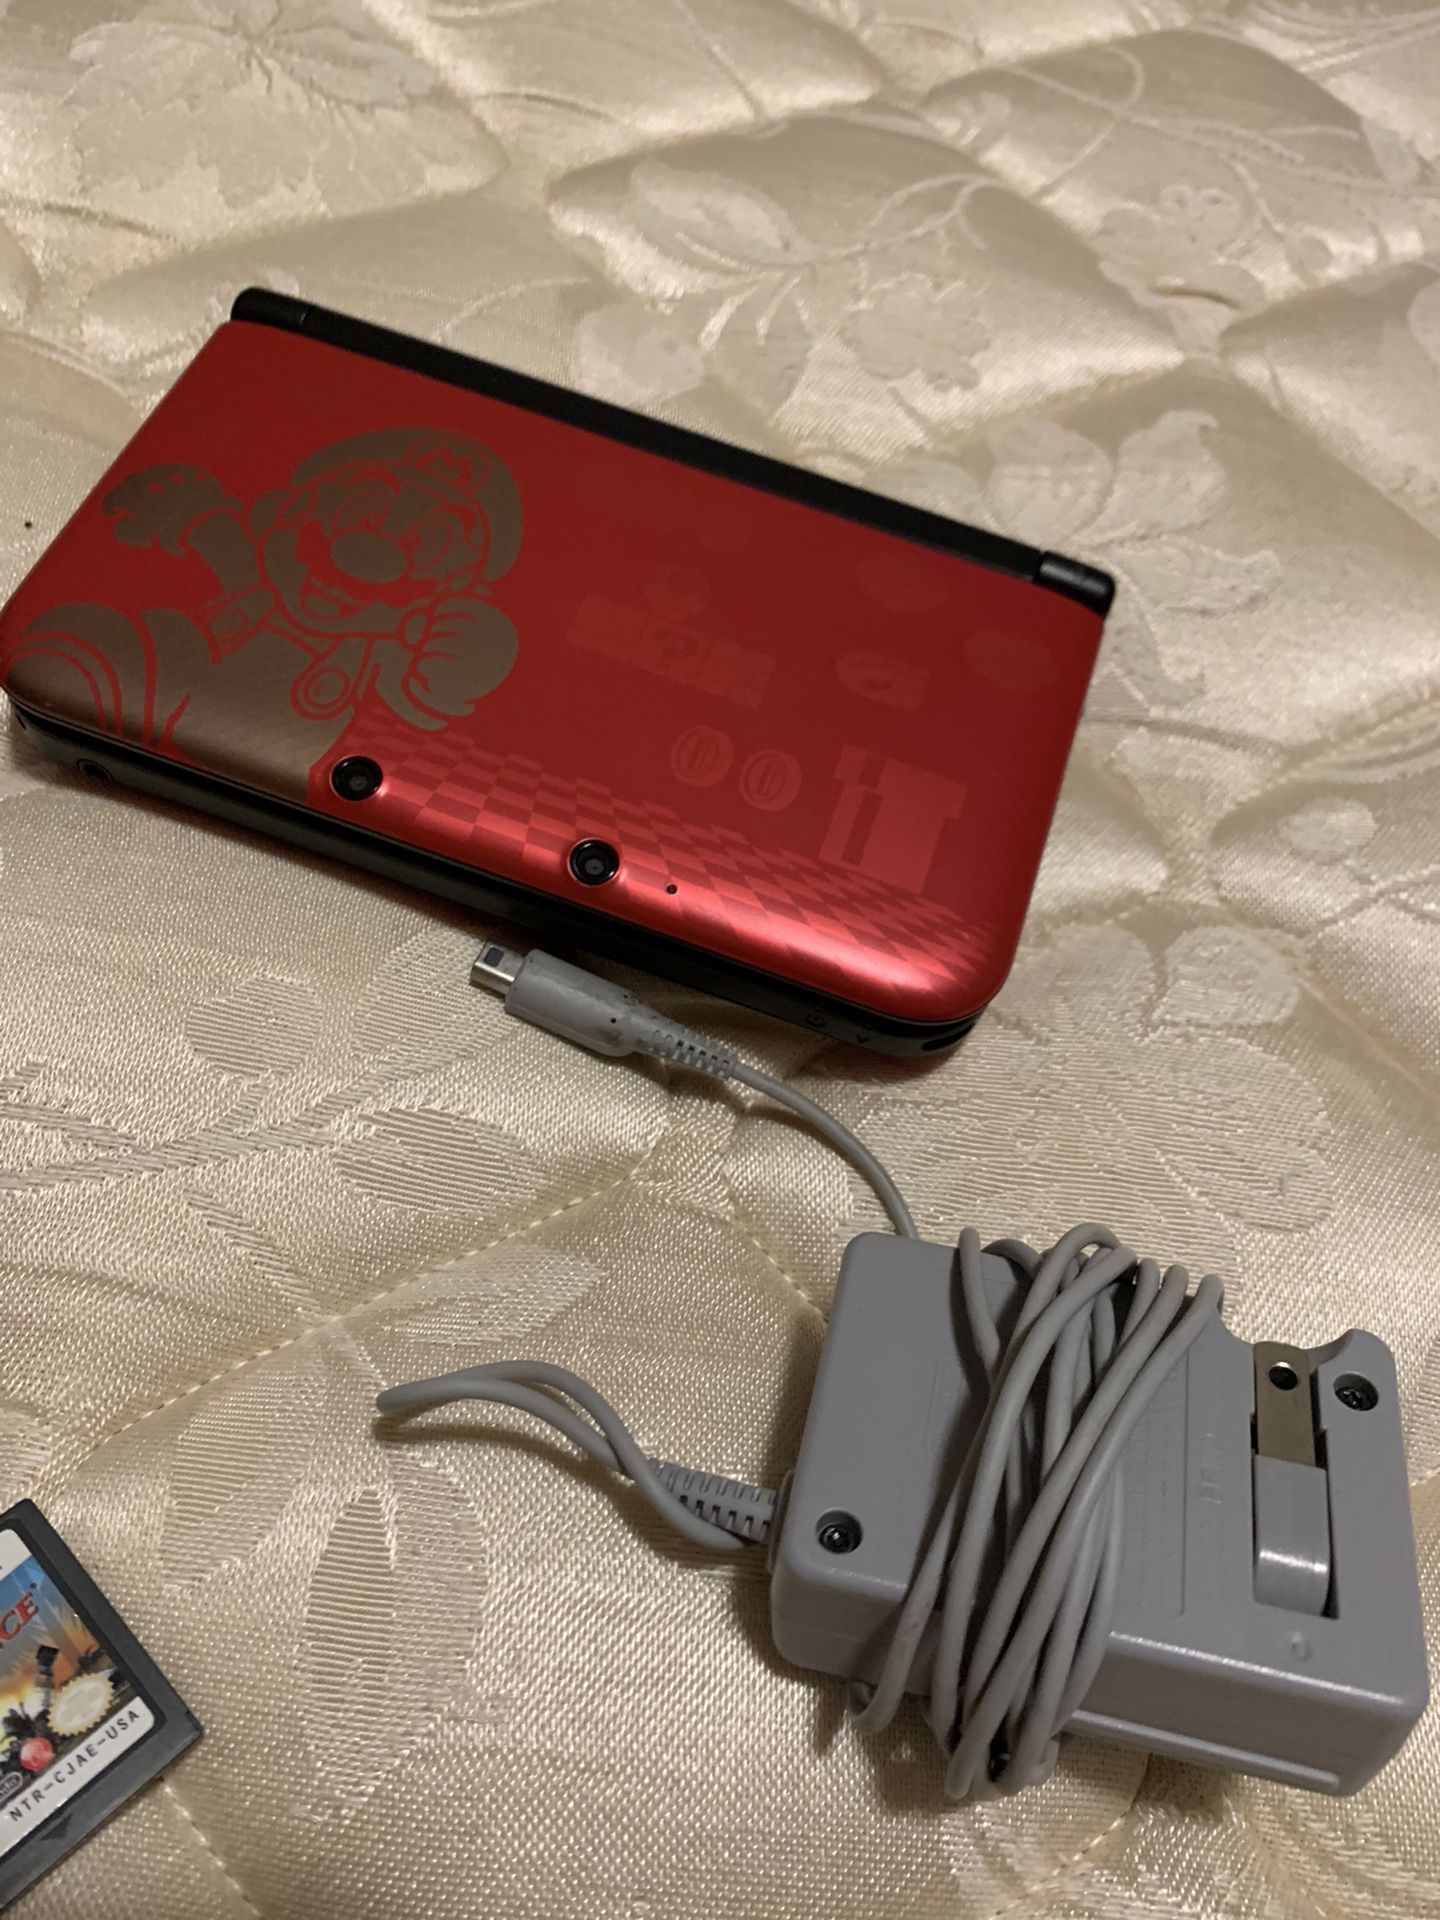 New Nintendo 3DS XL (latest model; comes with charger and 2 games)